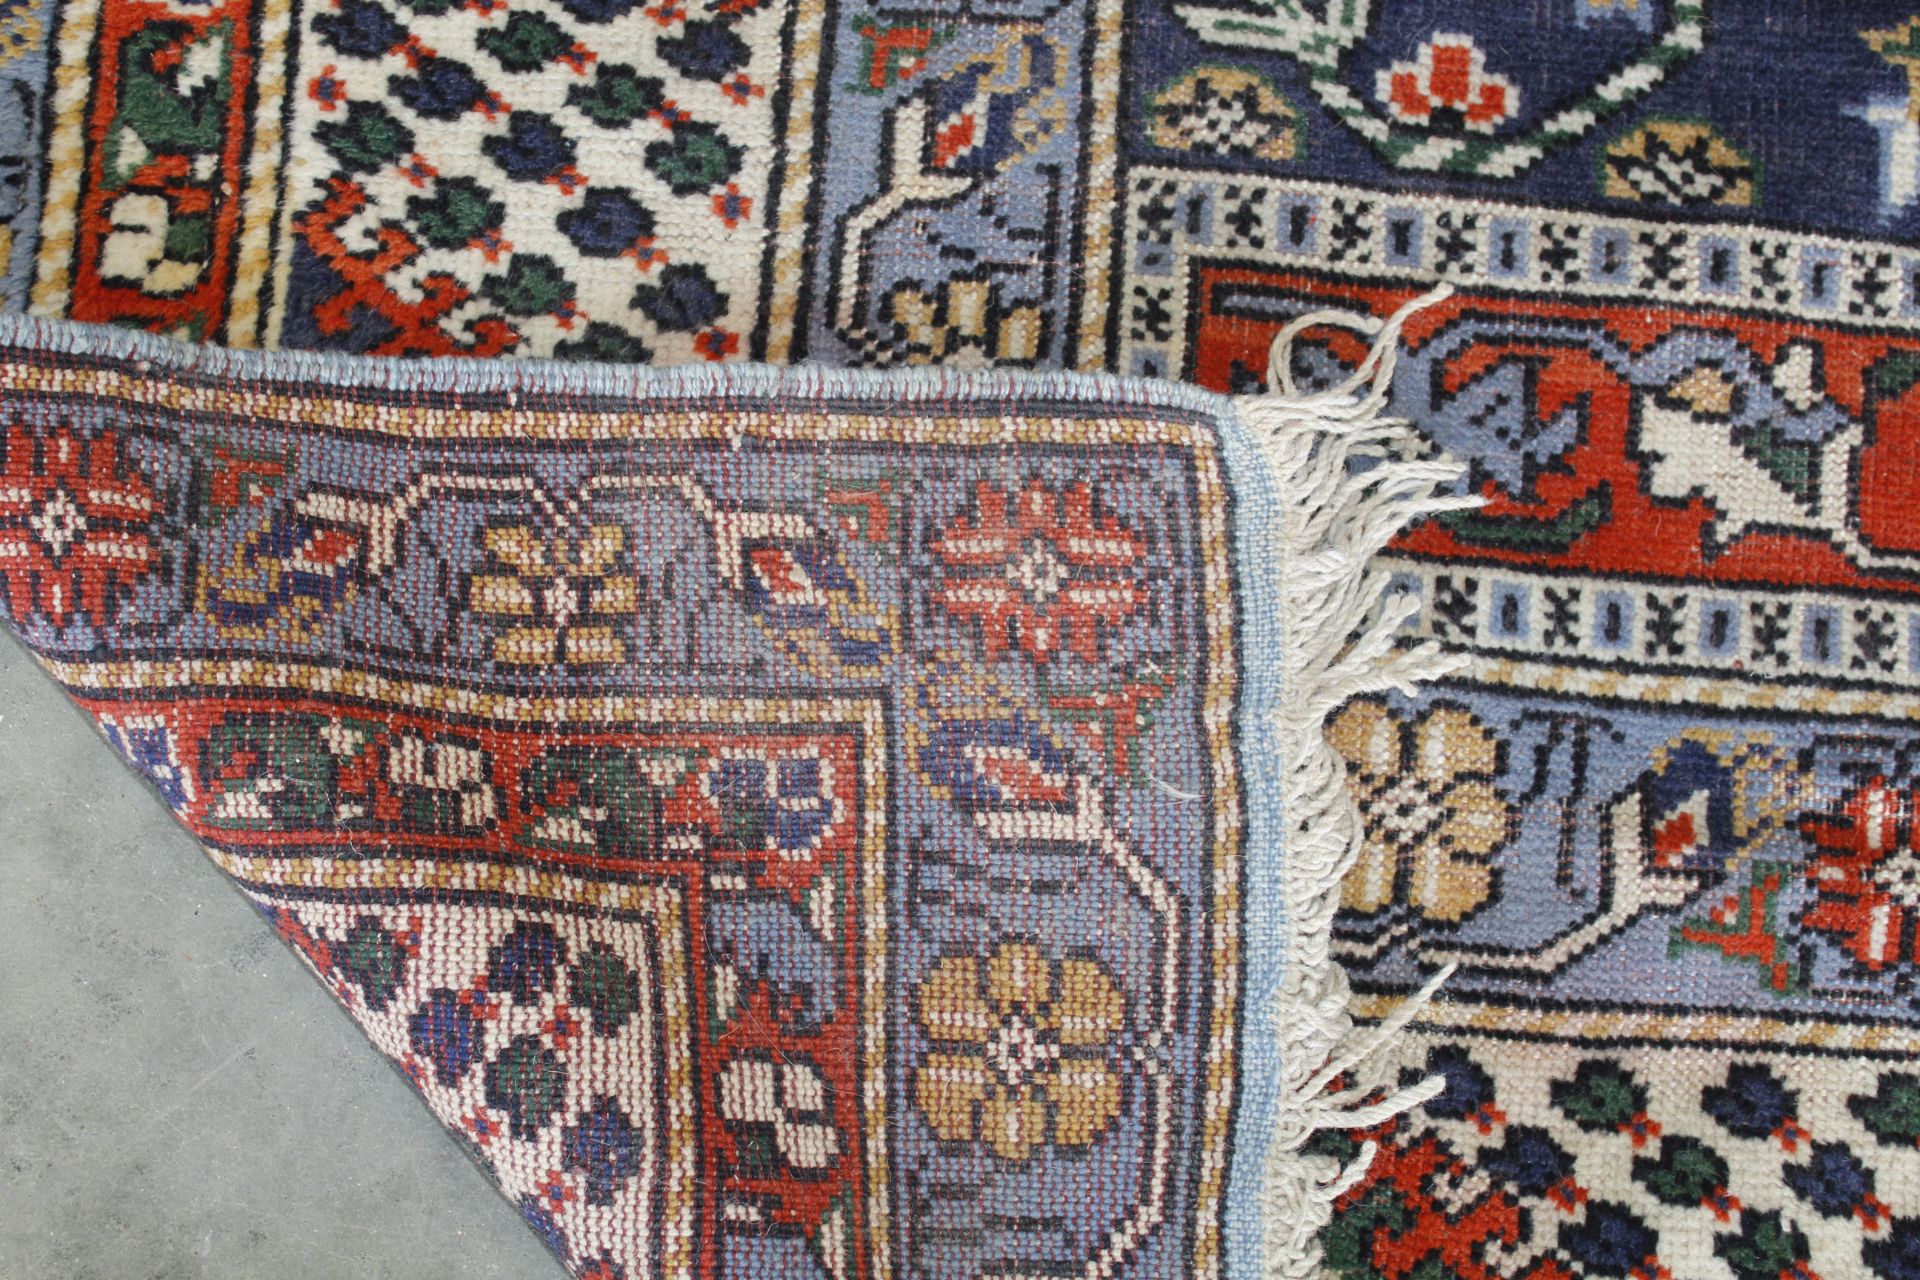 An approx. 9'5" x 6'3" patterned rug - Image 5 of 5